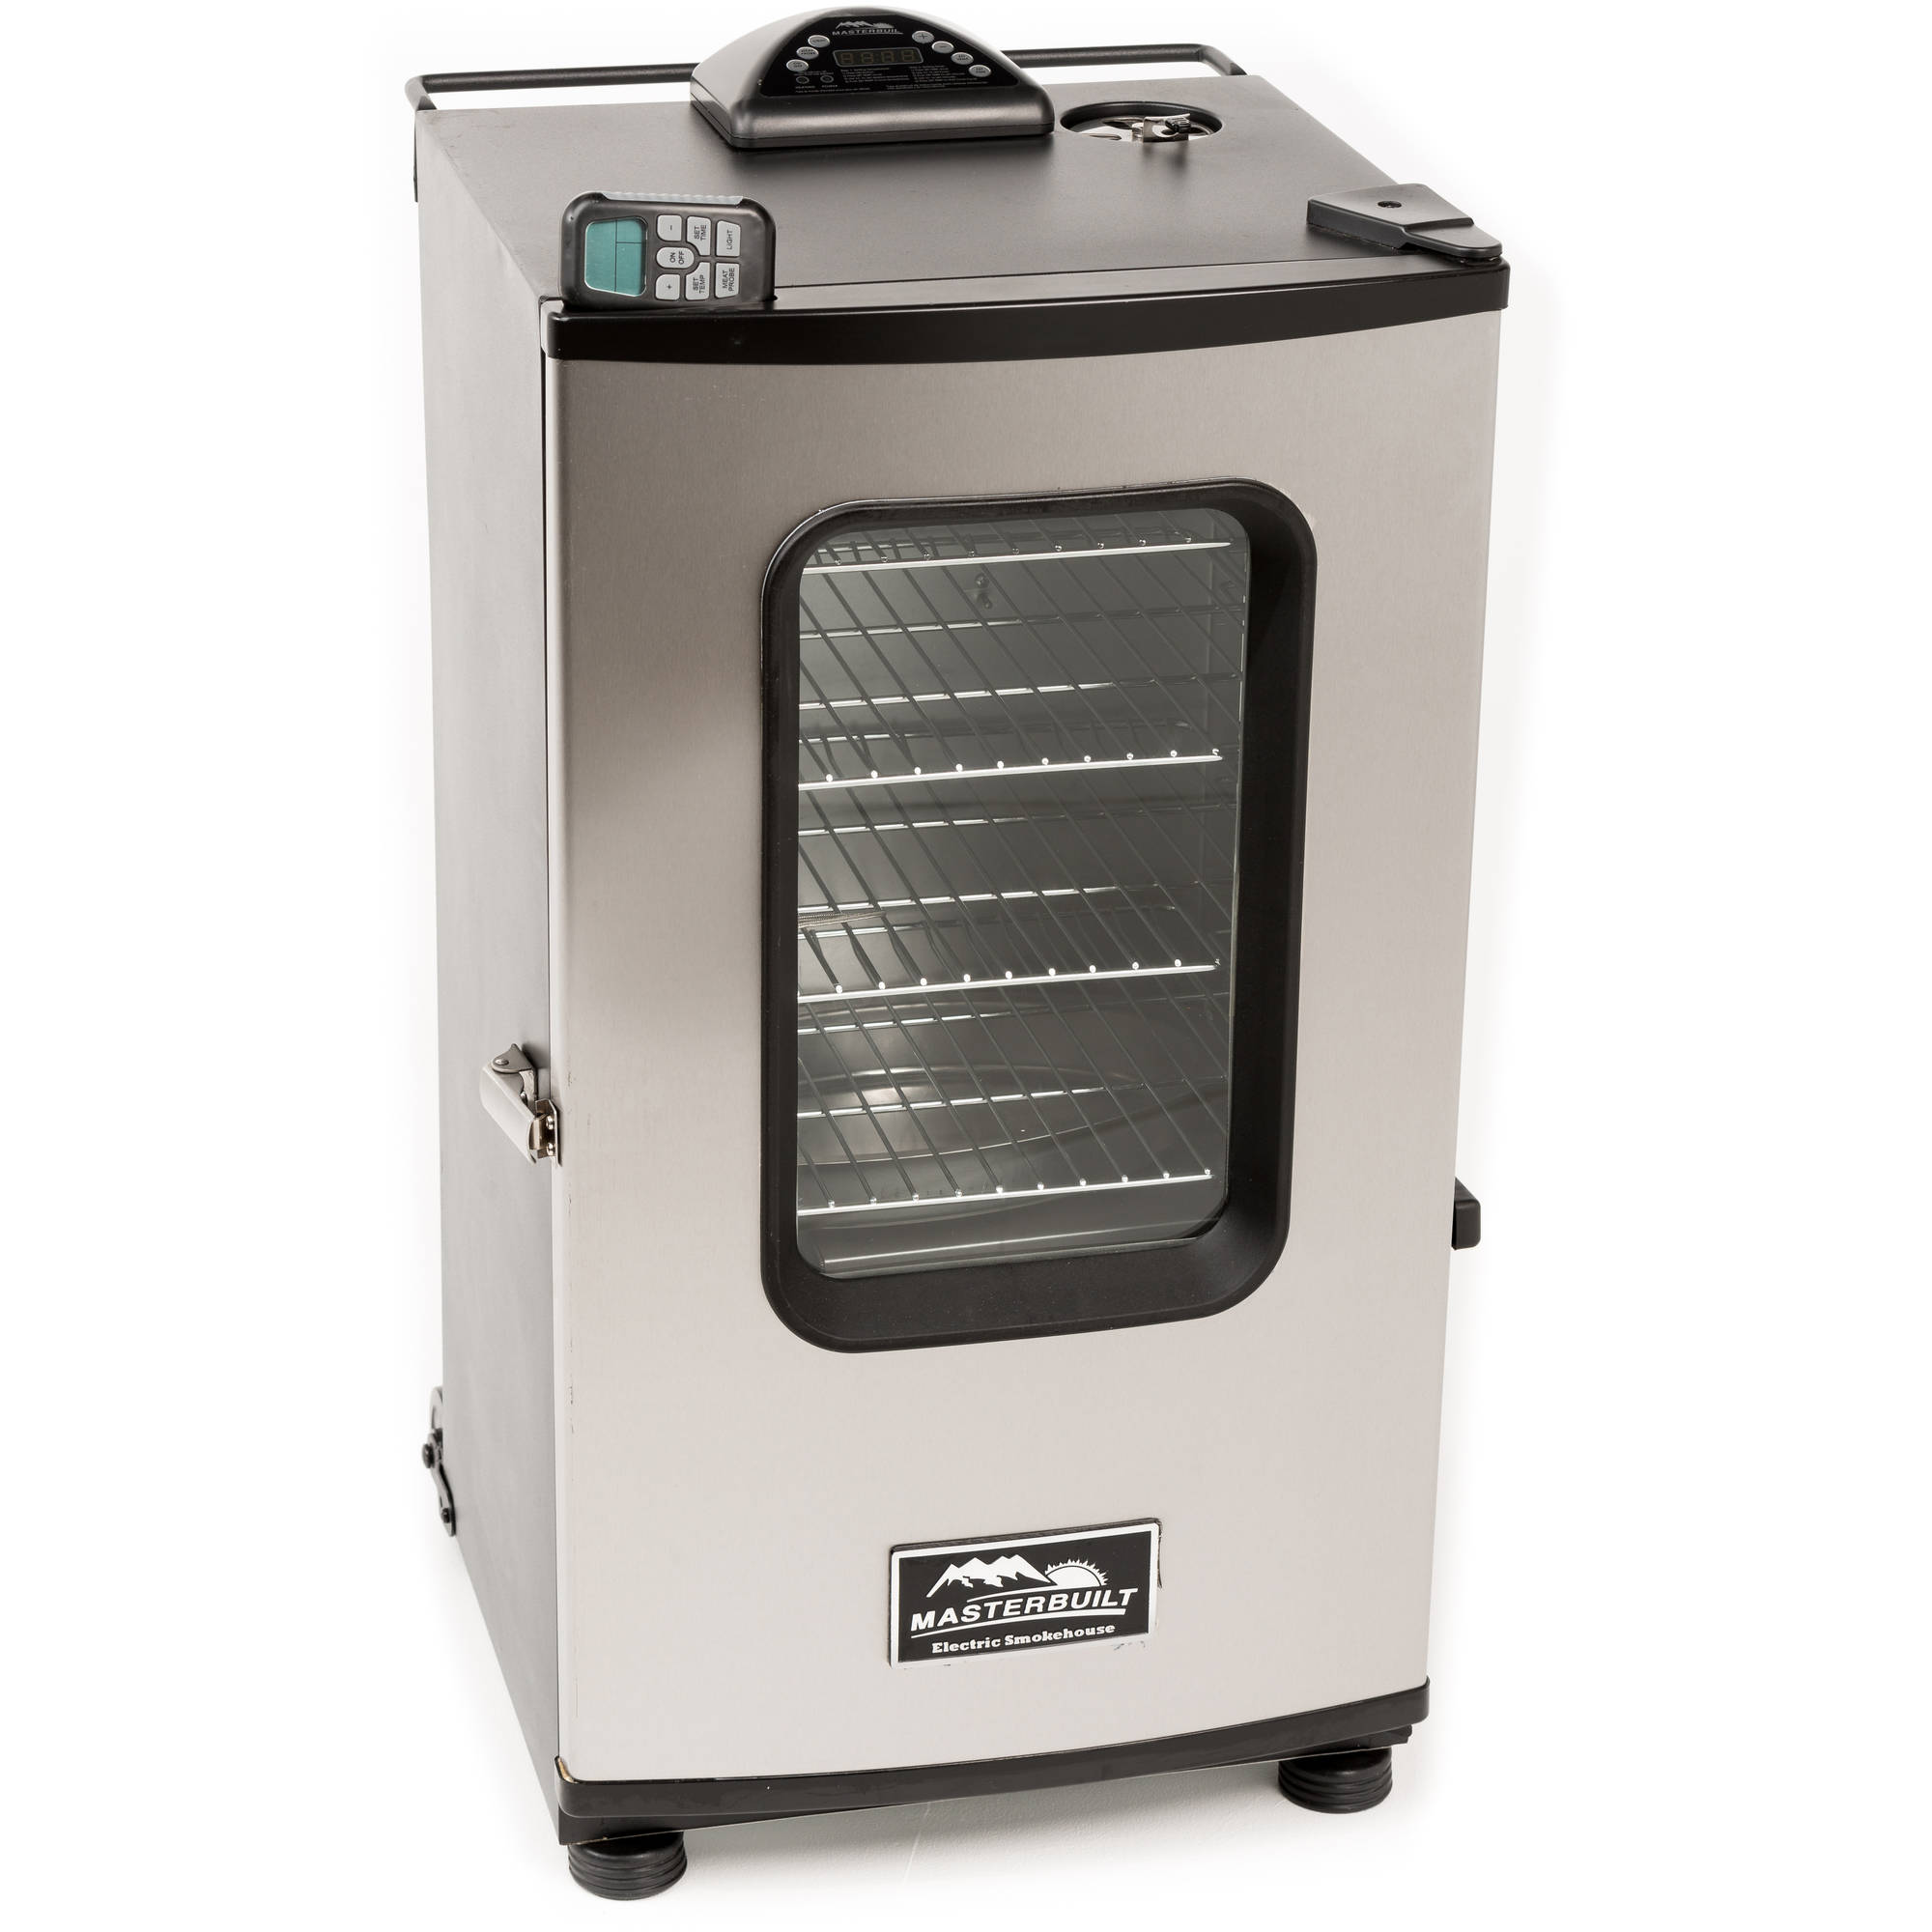 Masterbuilt 30" Electric Smoker with Window - image 1 of 5